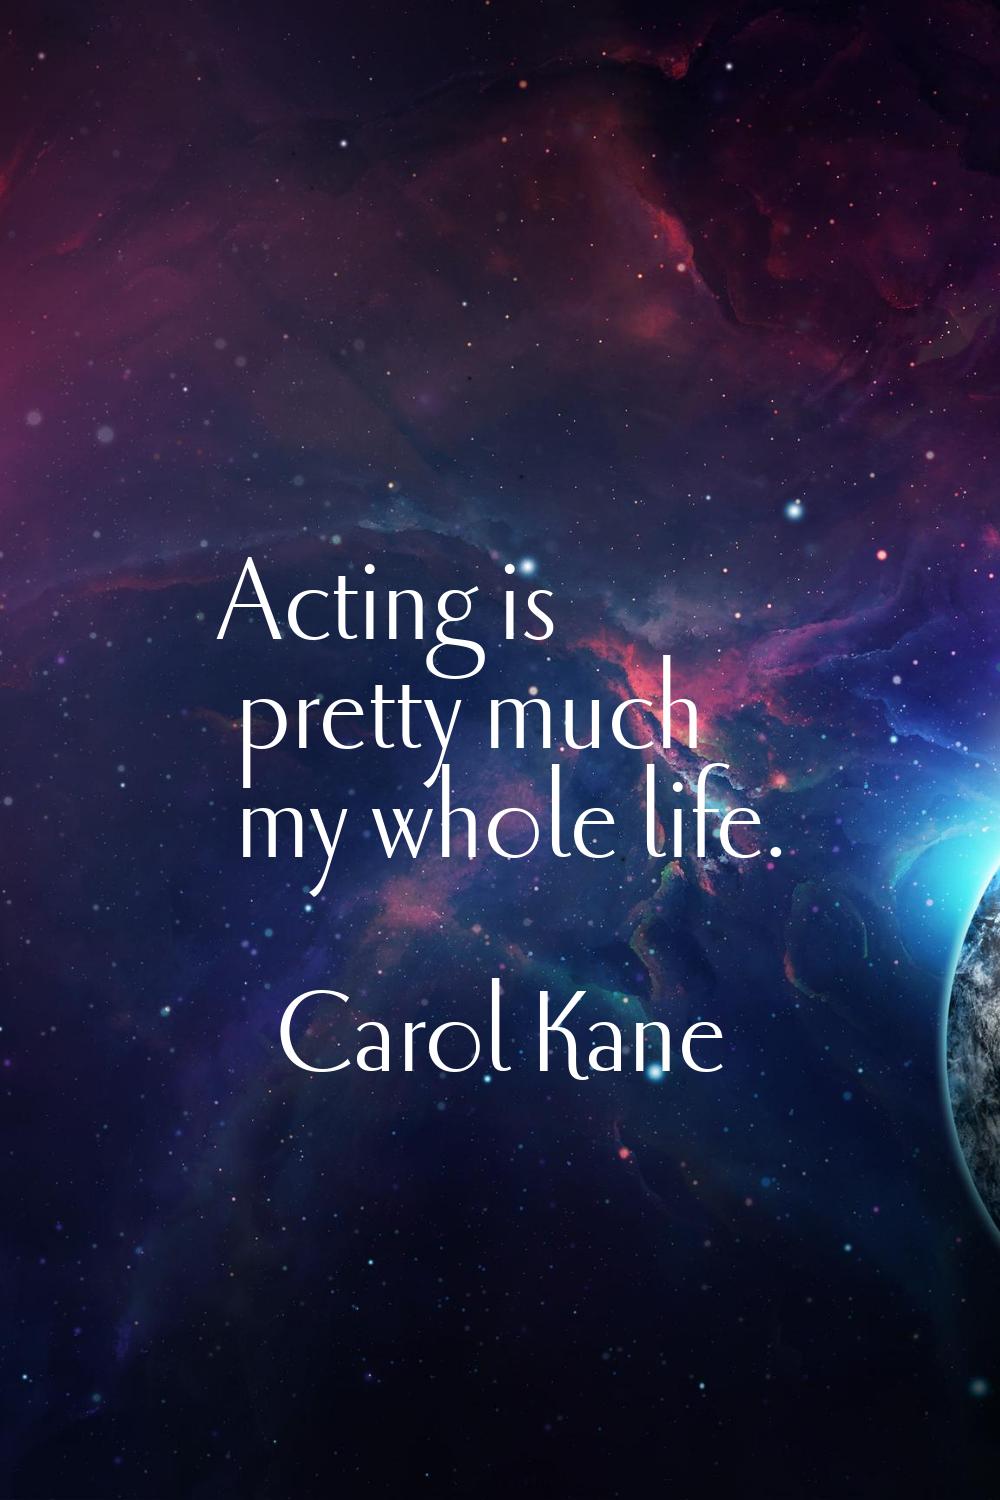 Acting is pretty much my whole life.